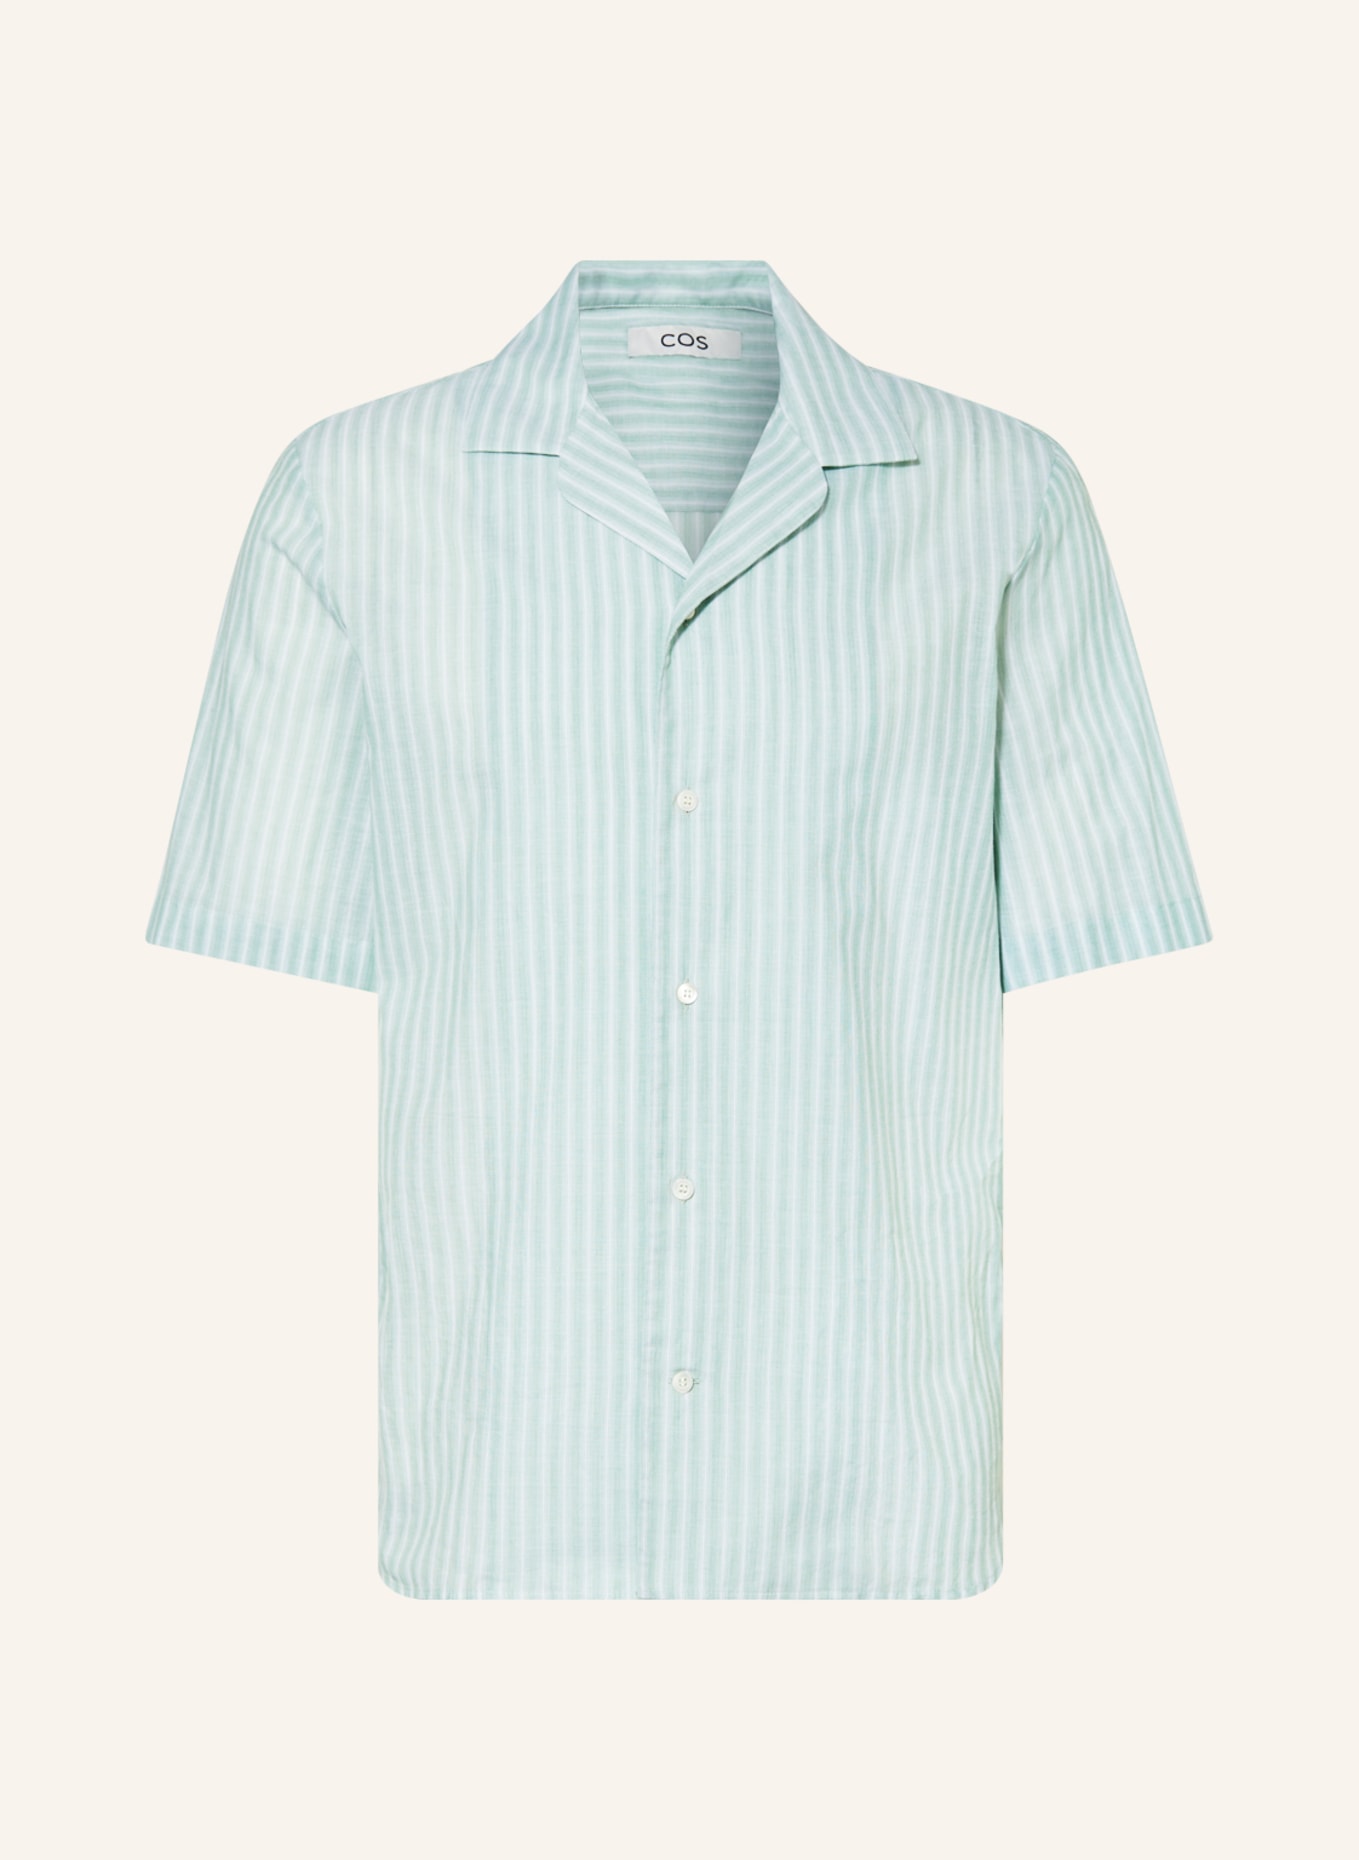 COS Short sleeve shirt relaxed fit, Color: LIGHT GREEN/ WHITE (Image 1)